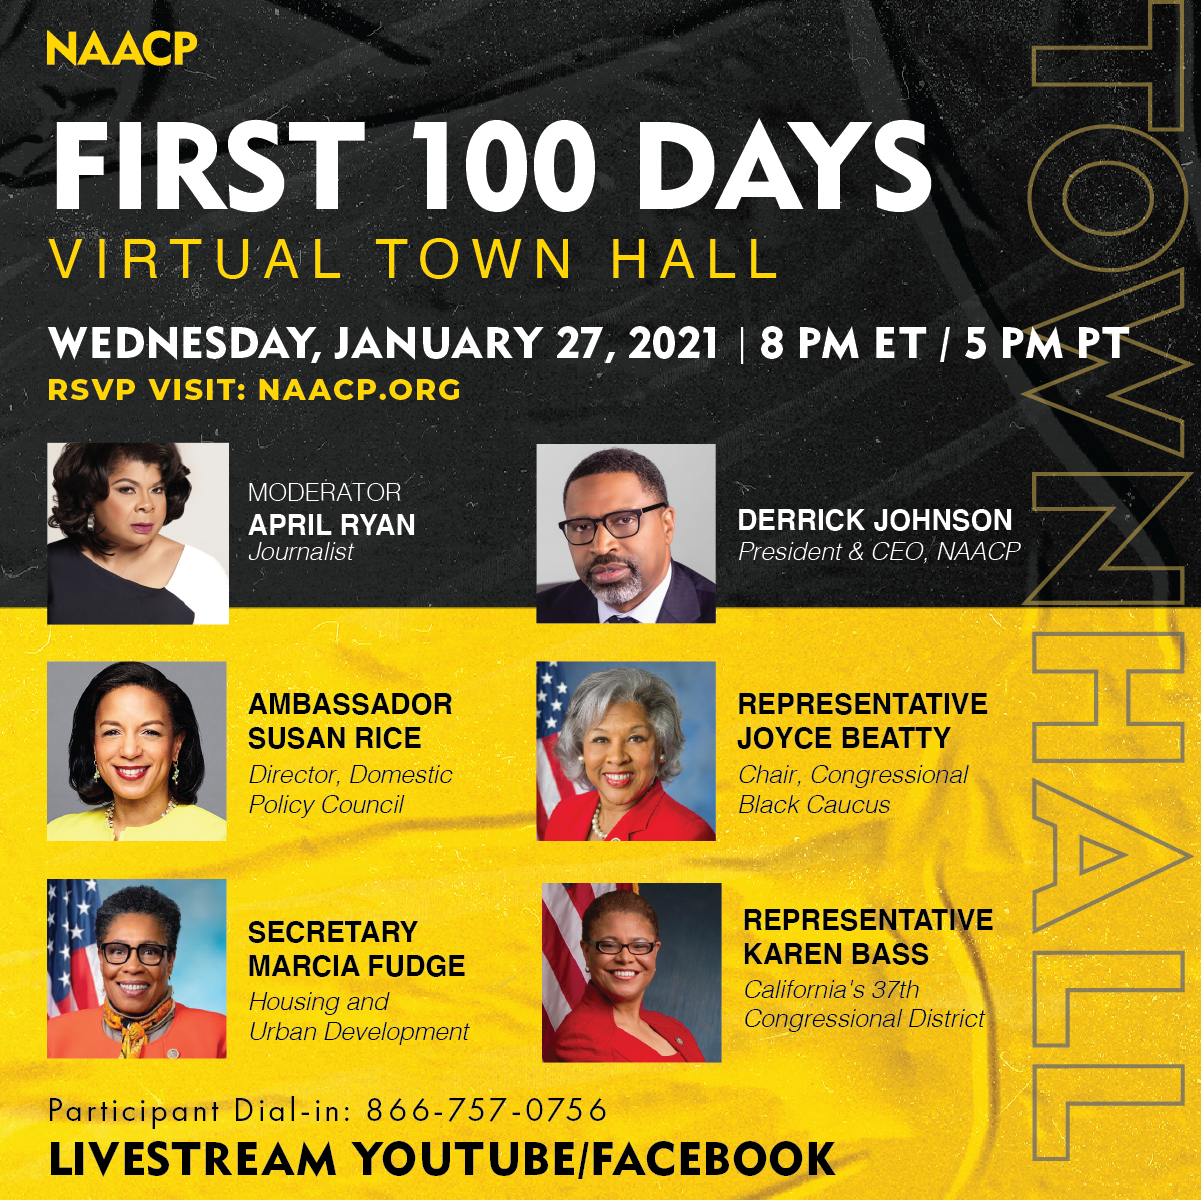 NAACP - First 100 Days Virtual Town Hall  - RSVP